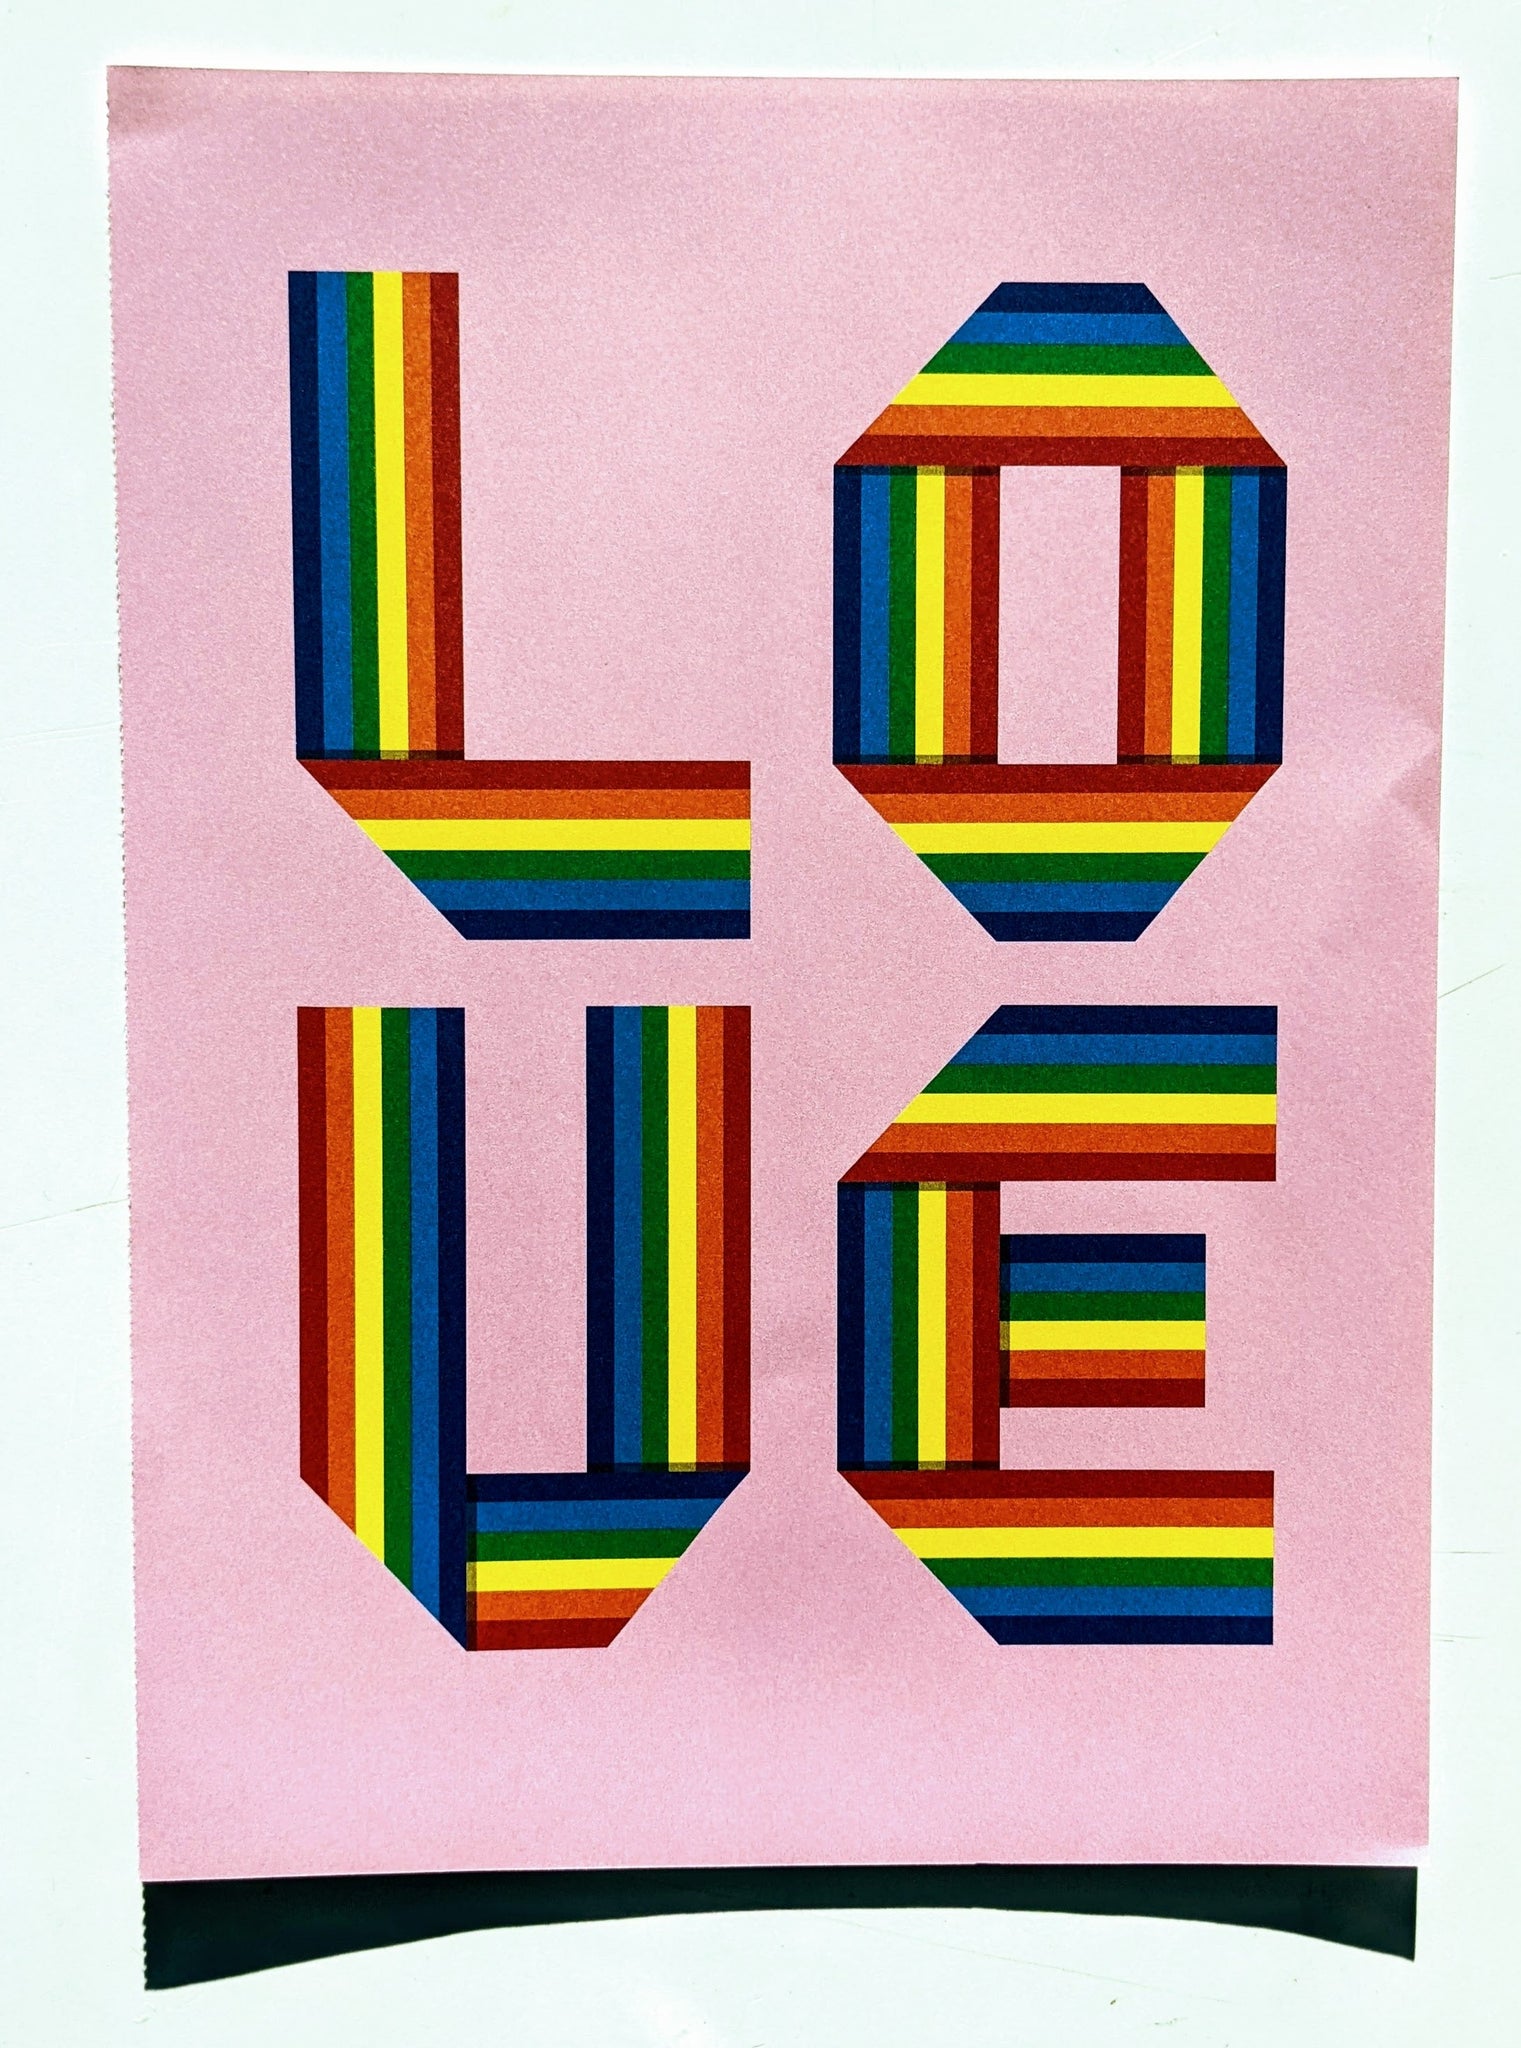 'Love Wins' Poster for Change